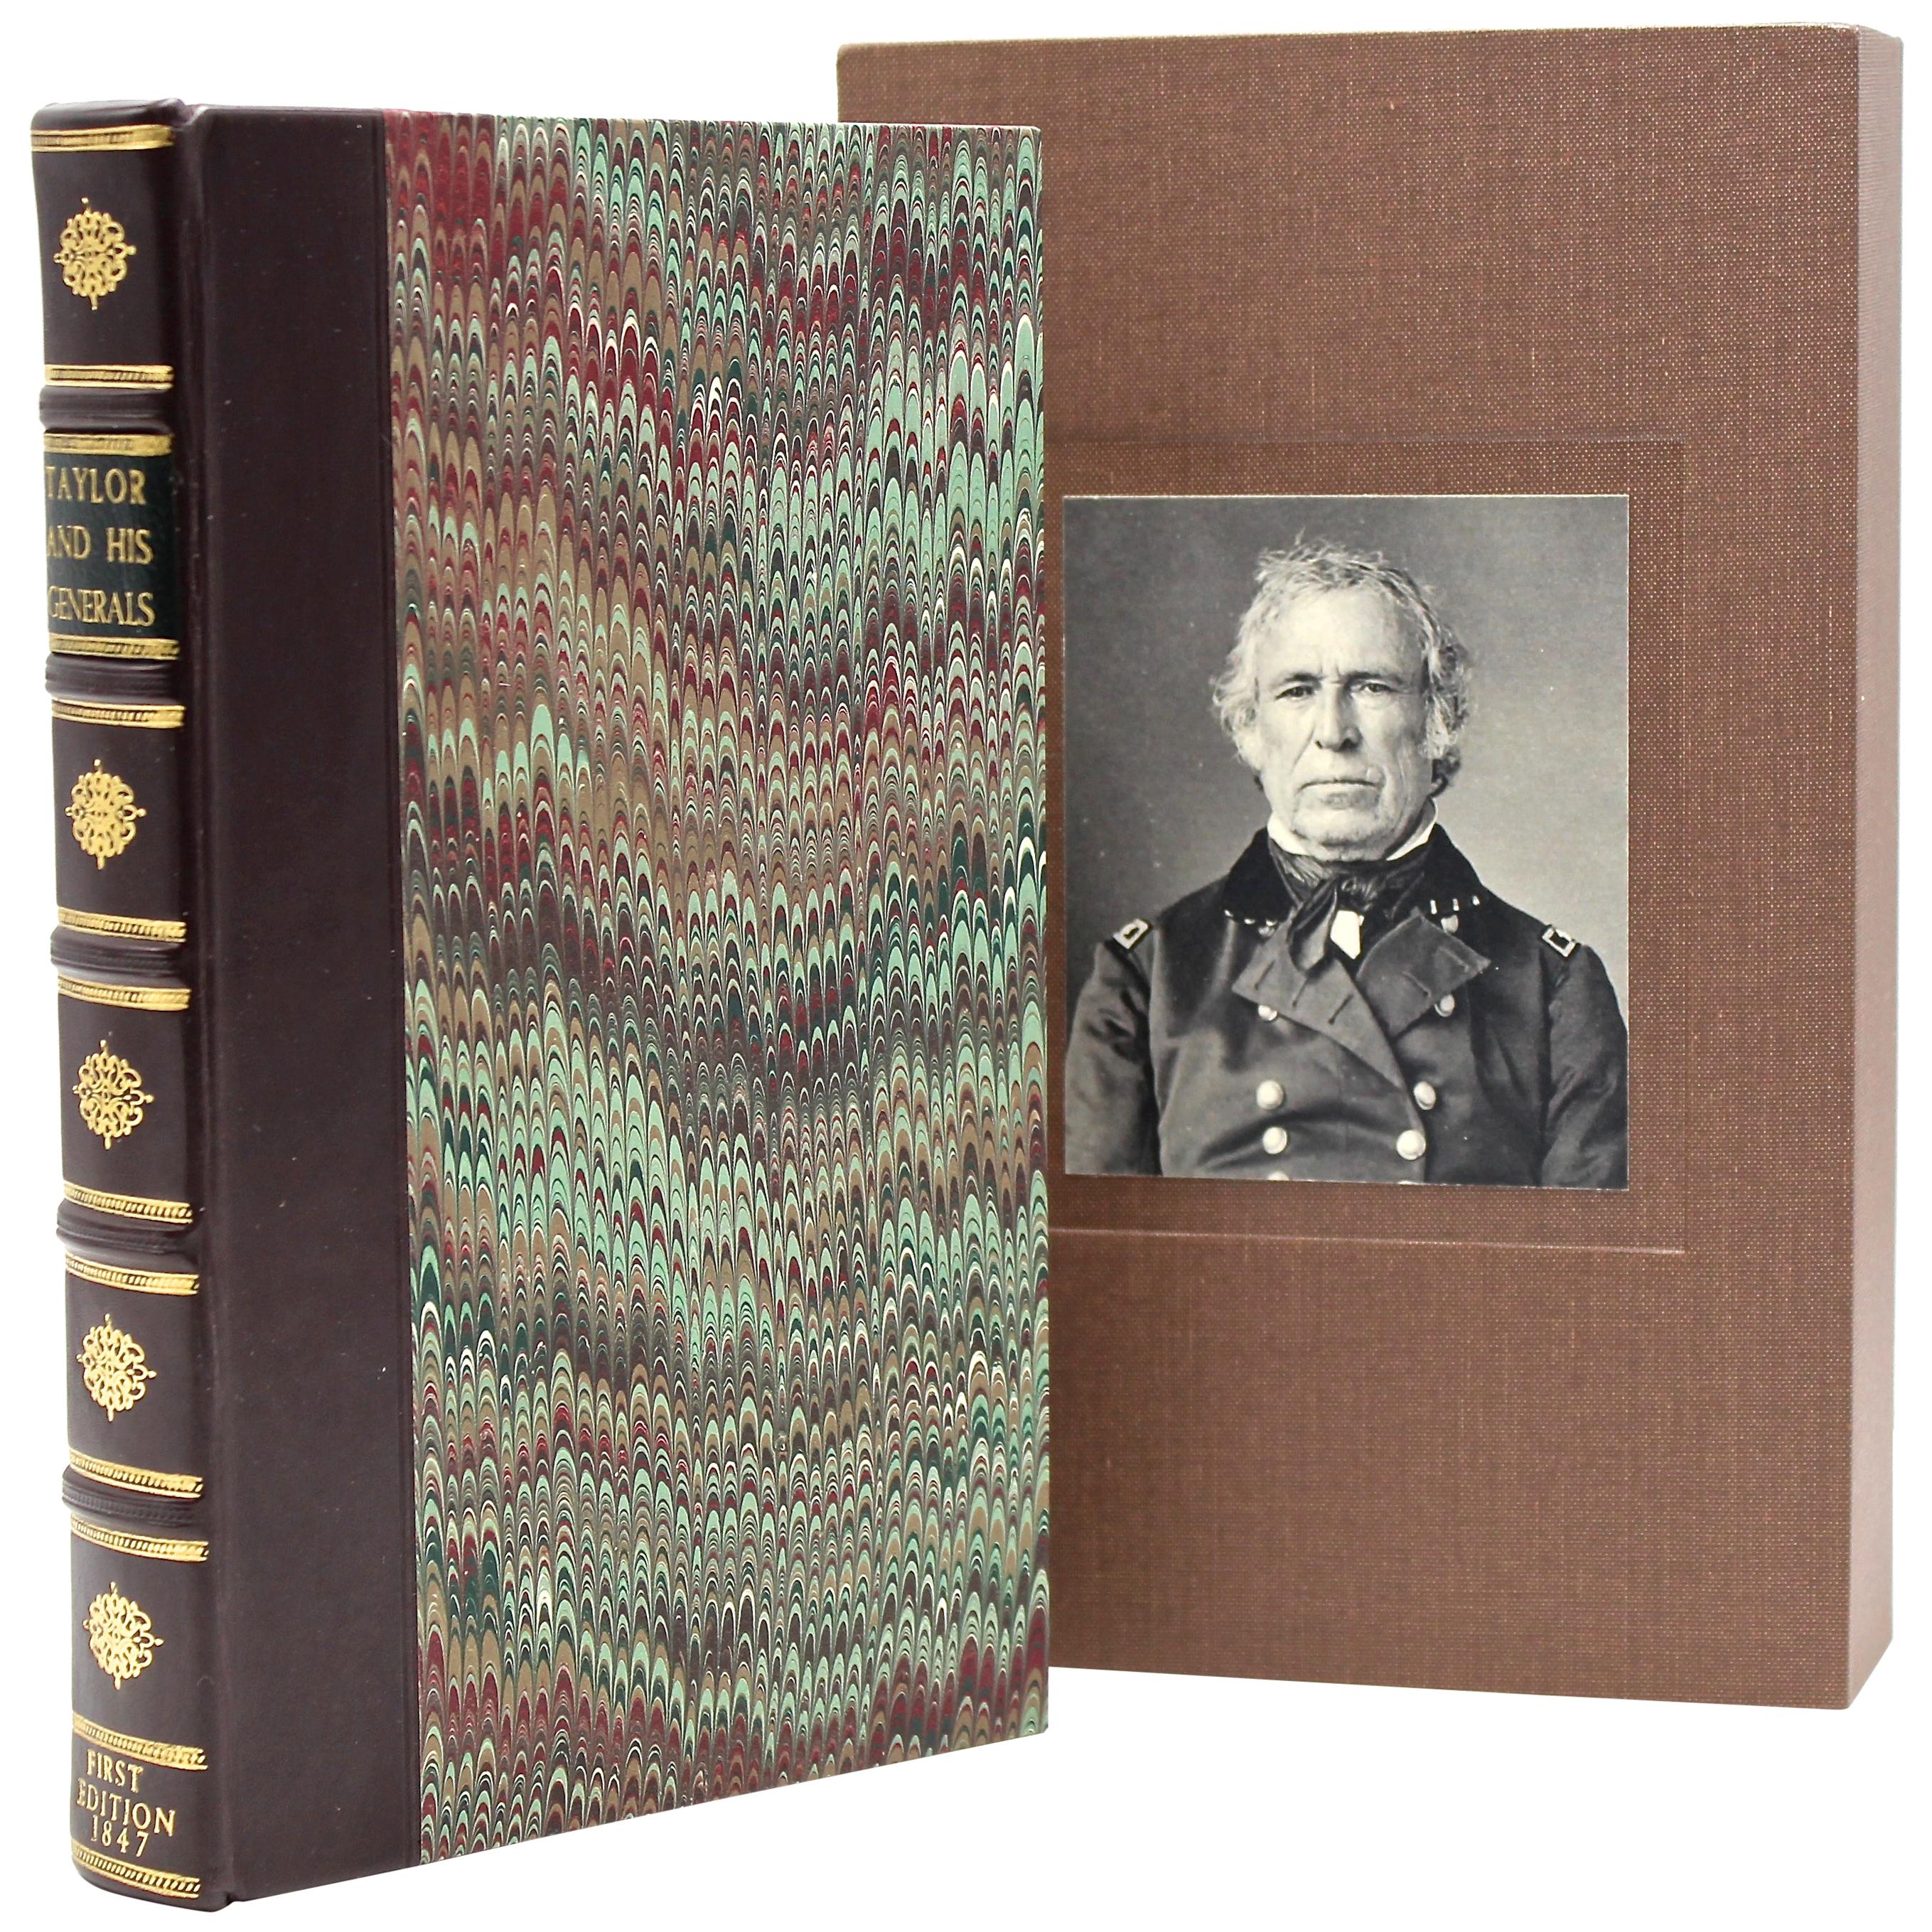 "Taylor and His Generals," First Edition, Published by E. H. Butler & Co., 1847